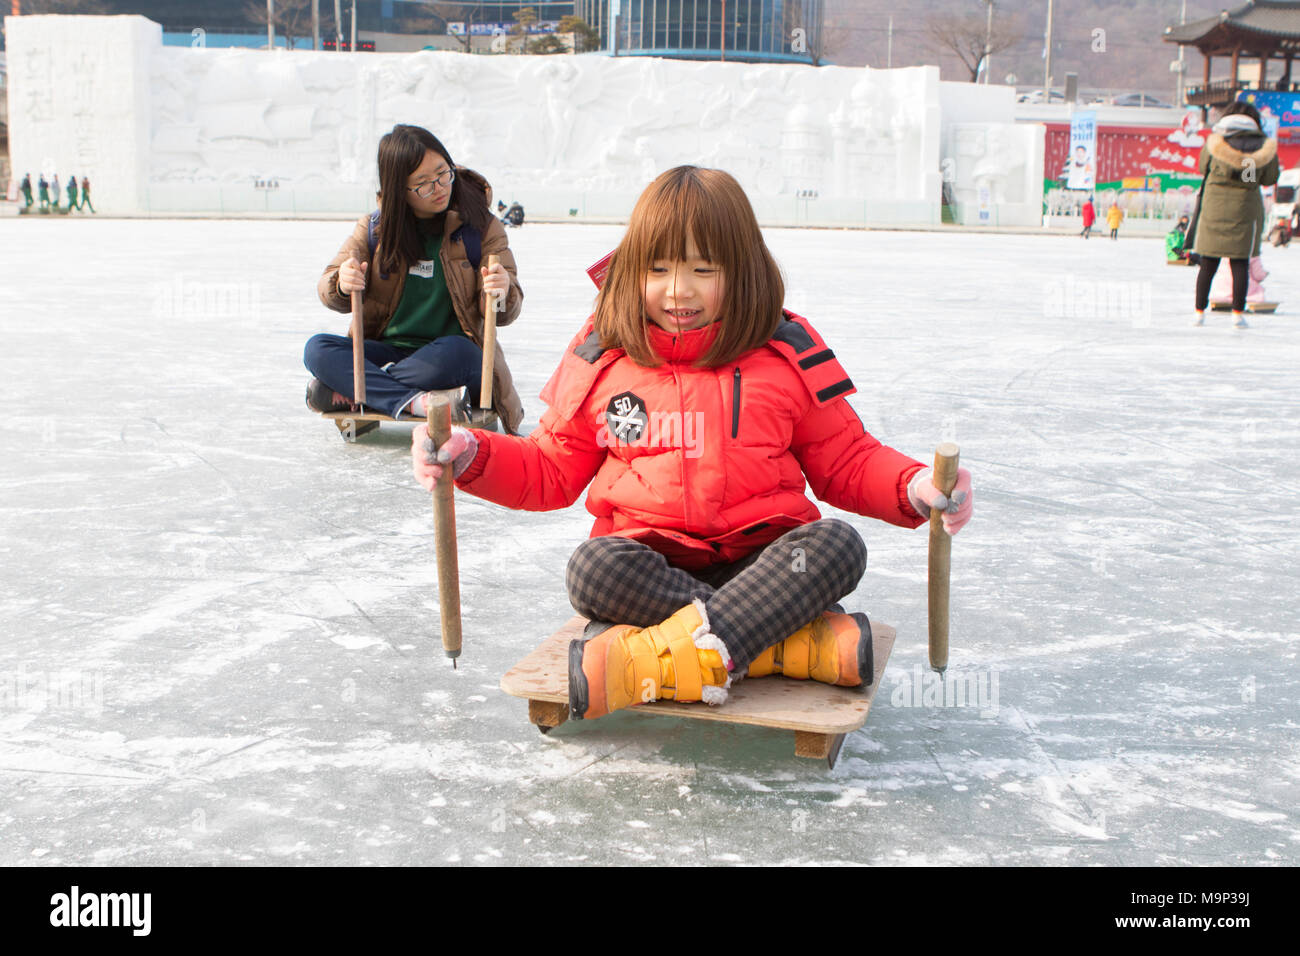 Two girls pushing themselves forward on sleds at the Hwacheon Sancheoneo Ice Festival.  The Hwacheon Sancheoneo Ice Festival is a tradition for Korean people. Every year in January crowds gather at the frozen river to celebrate the cold and snow of winter. Main attraction is ice fishing. Young and old wait patiently over a small hole in the ice for a trout to bite. In tents they can let the fish grilled after which they are eaten. Among other activities are sledding and ice skating.  The nearby Pyeongchang region will host the Winter Olympics in February 2018. Stock Photo